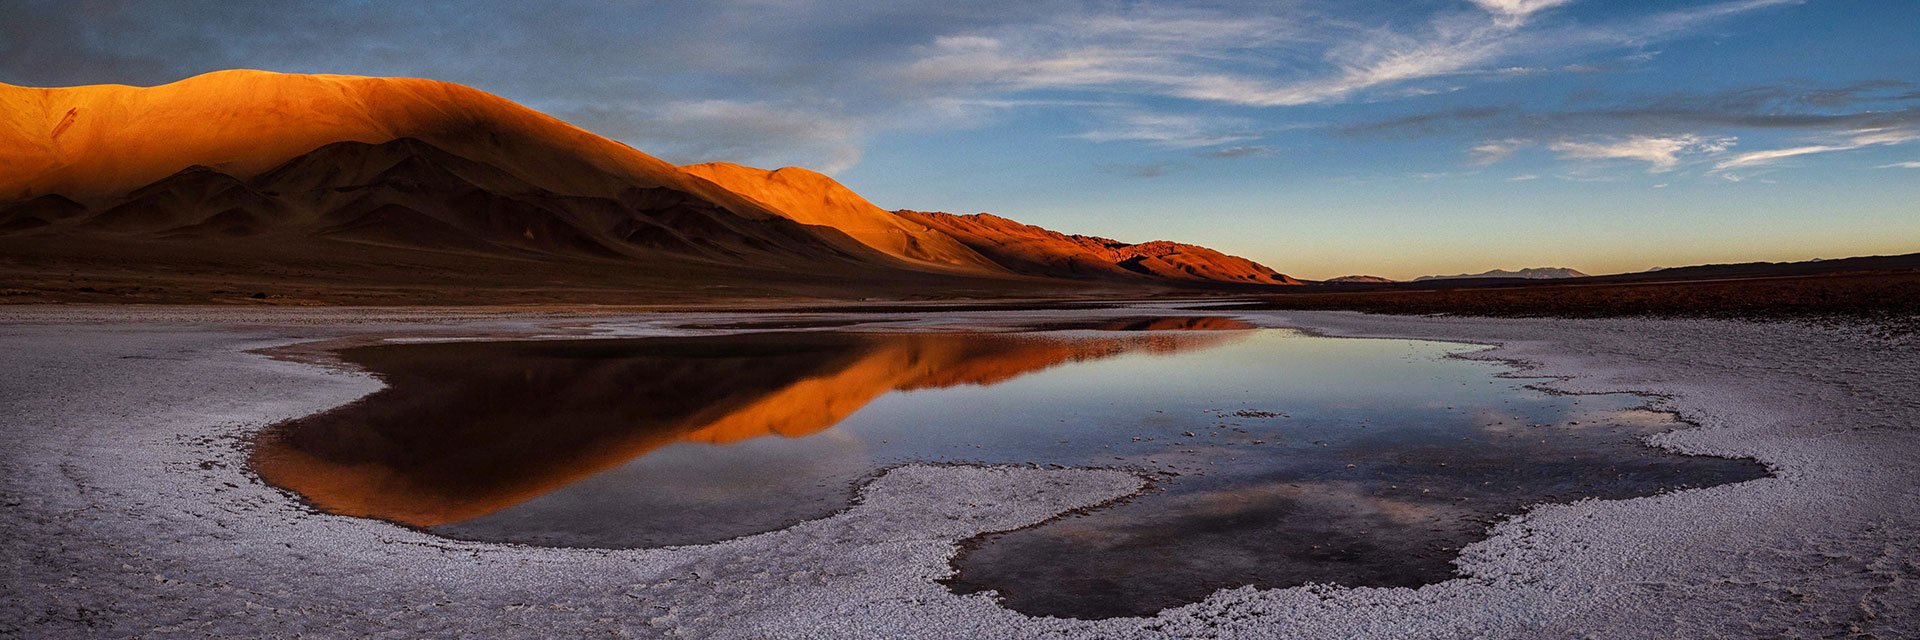 Salt lake in The Andes, Argentina.